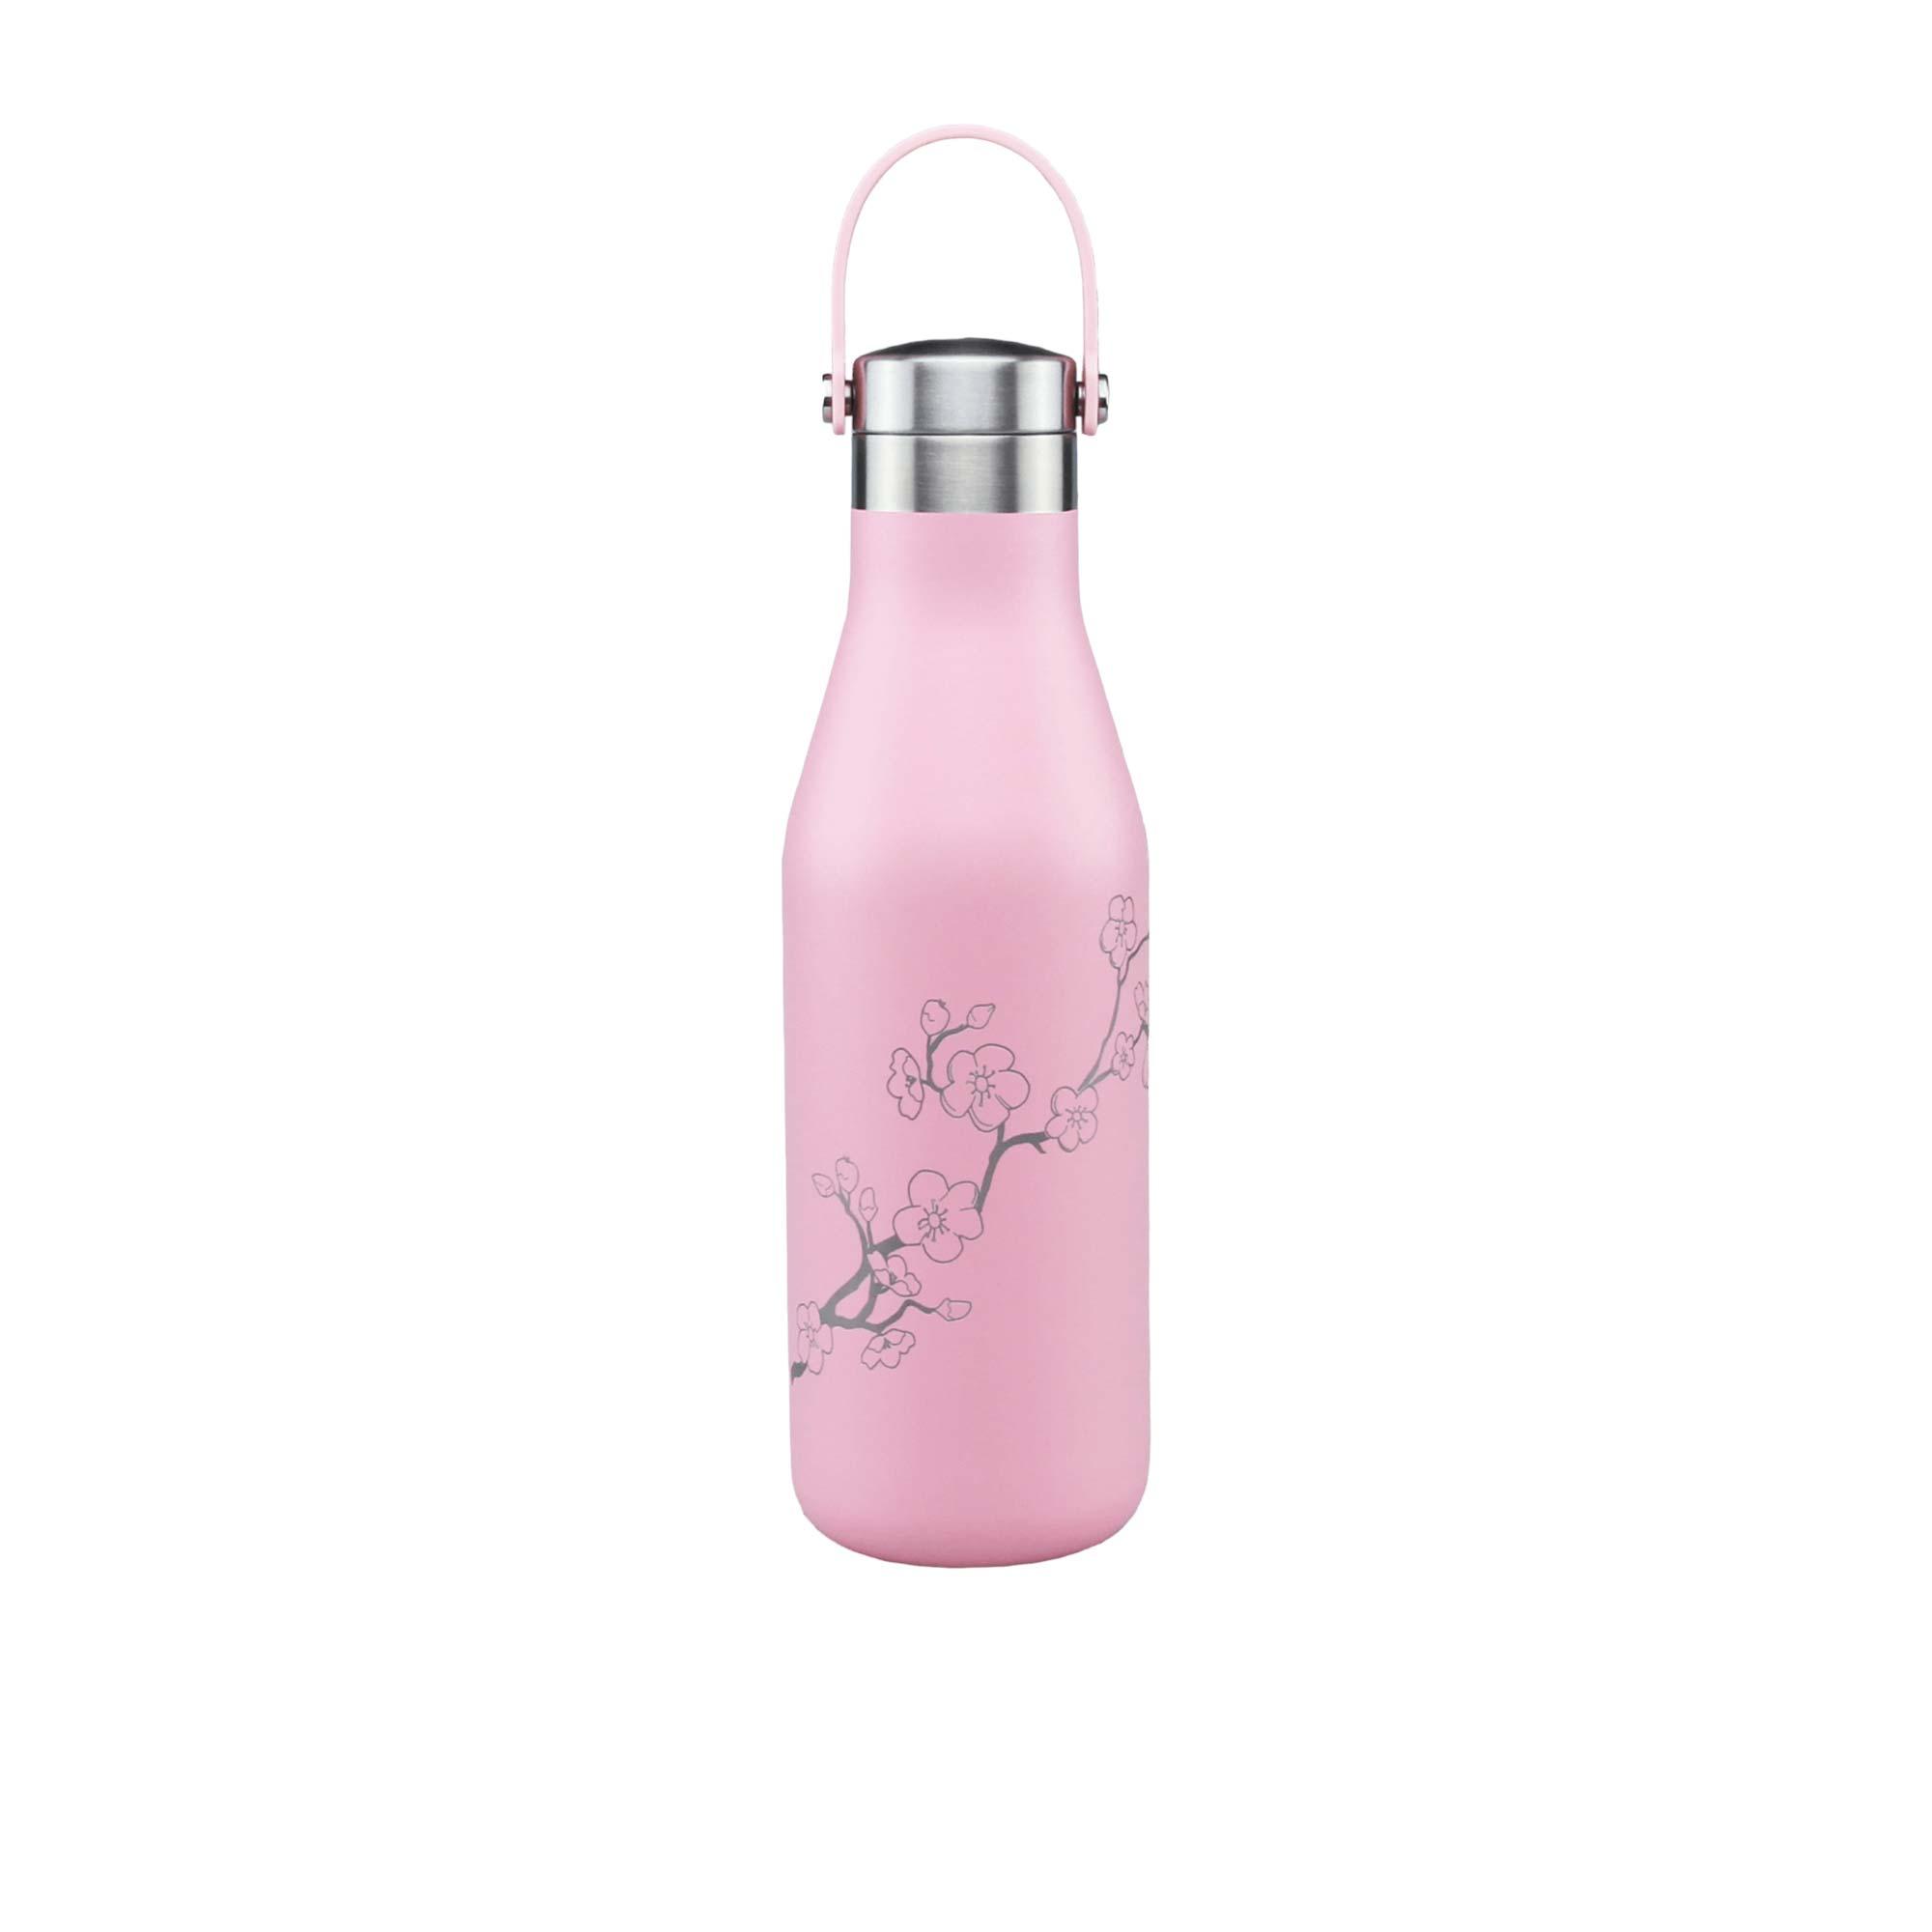 Ohelo Insulated Drink Bottle 500ml Pink Image 5